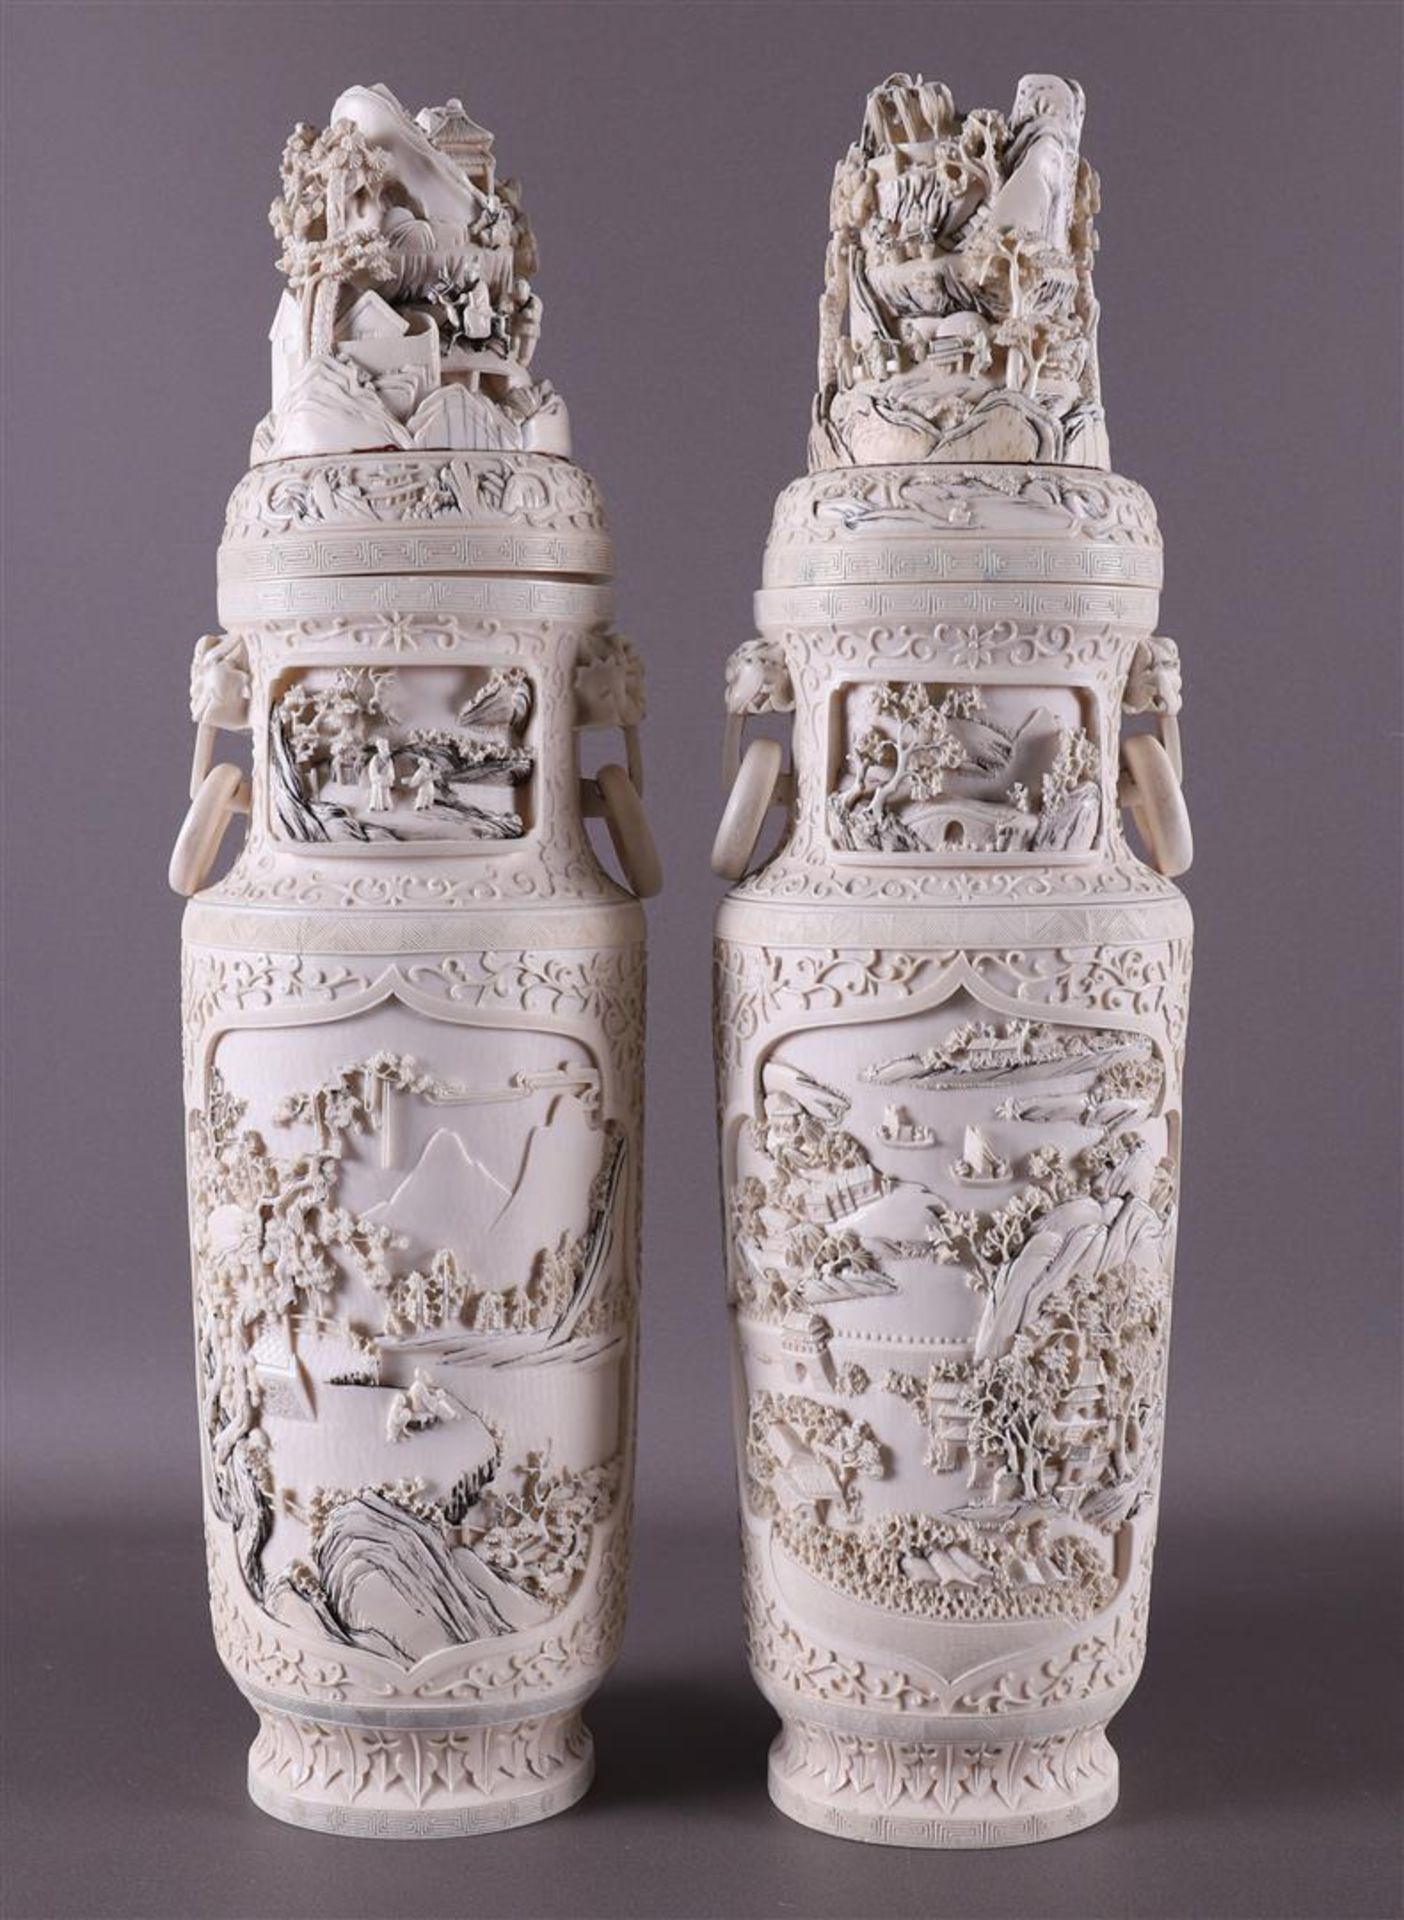 A pair of carved ivory baluster-shaped lidded vases with ringed lion heads as ears, China, Qing